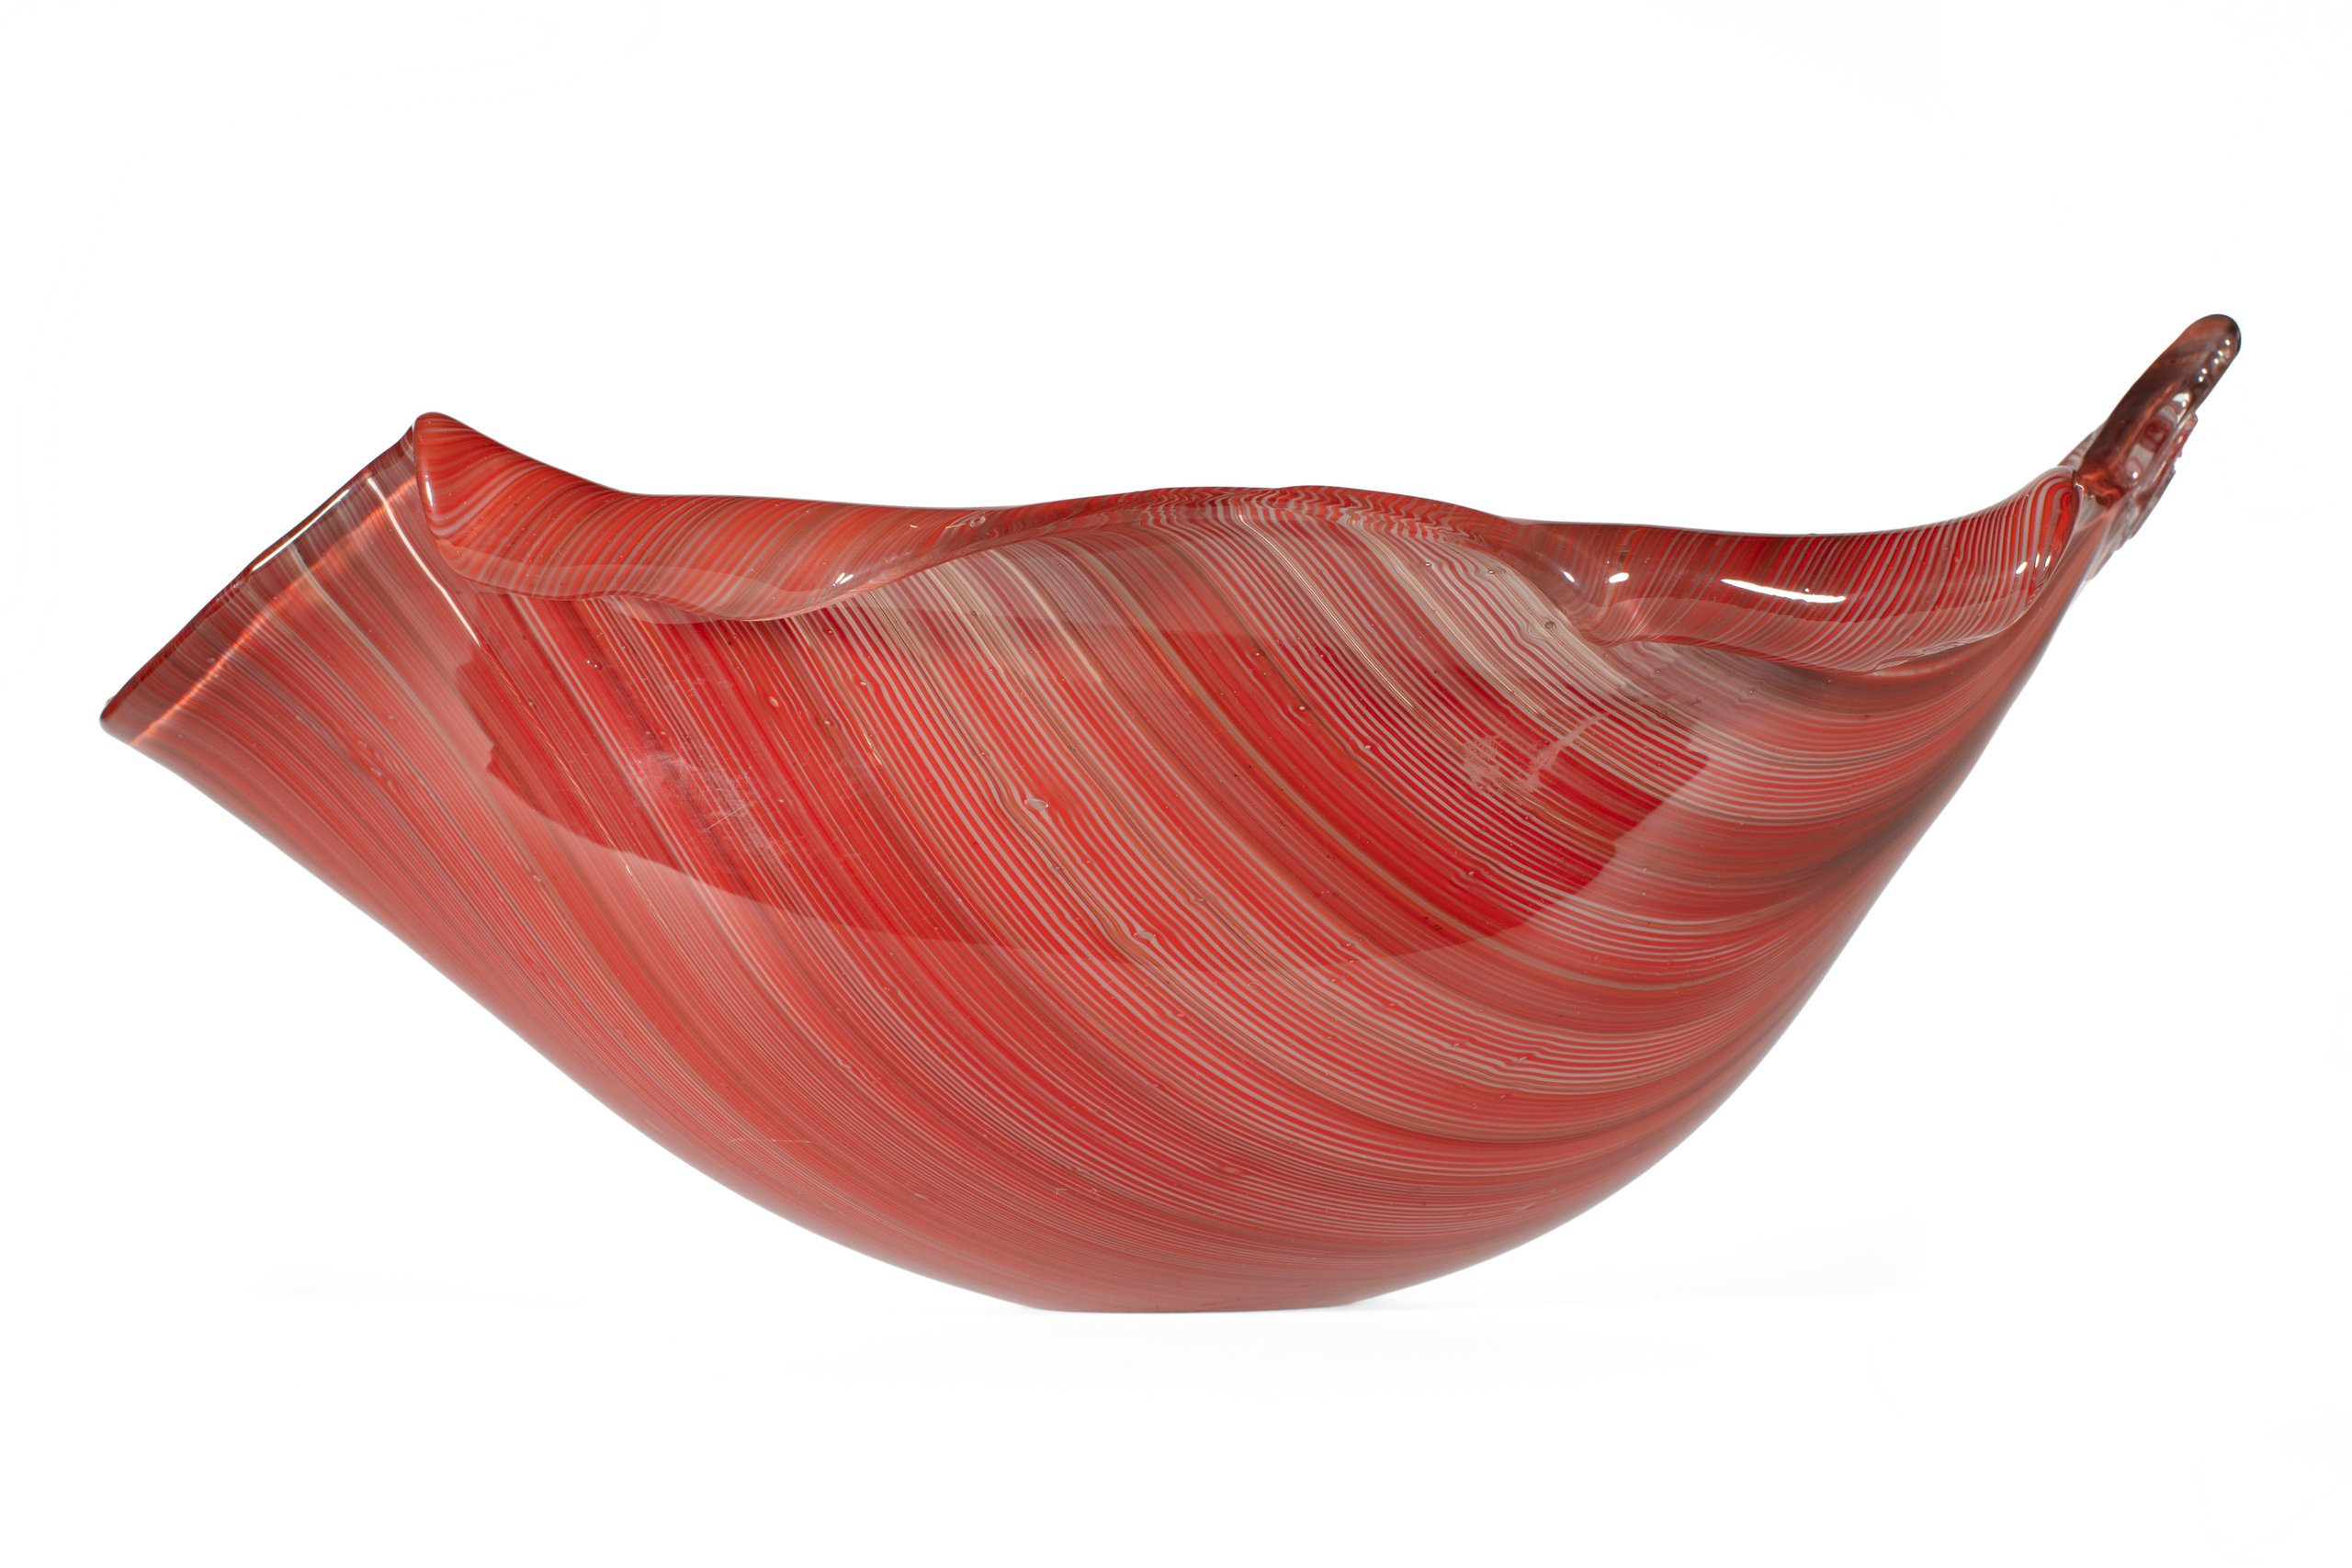 Large Red Murano Glass Bowl, 1950s for sale at Pamono